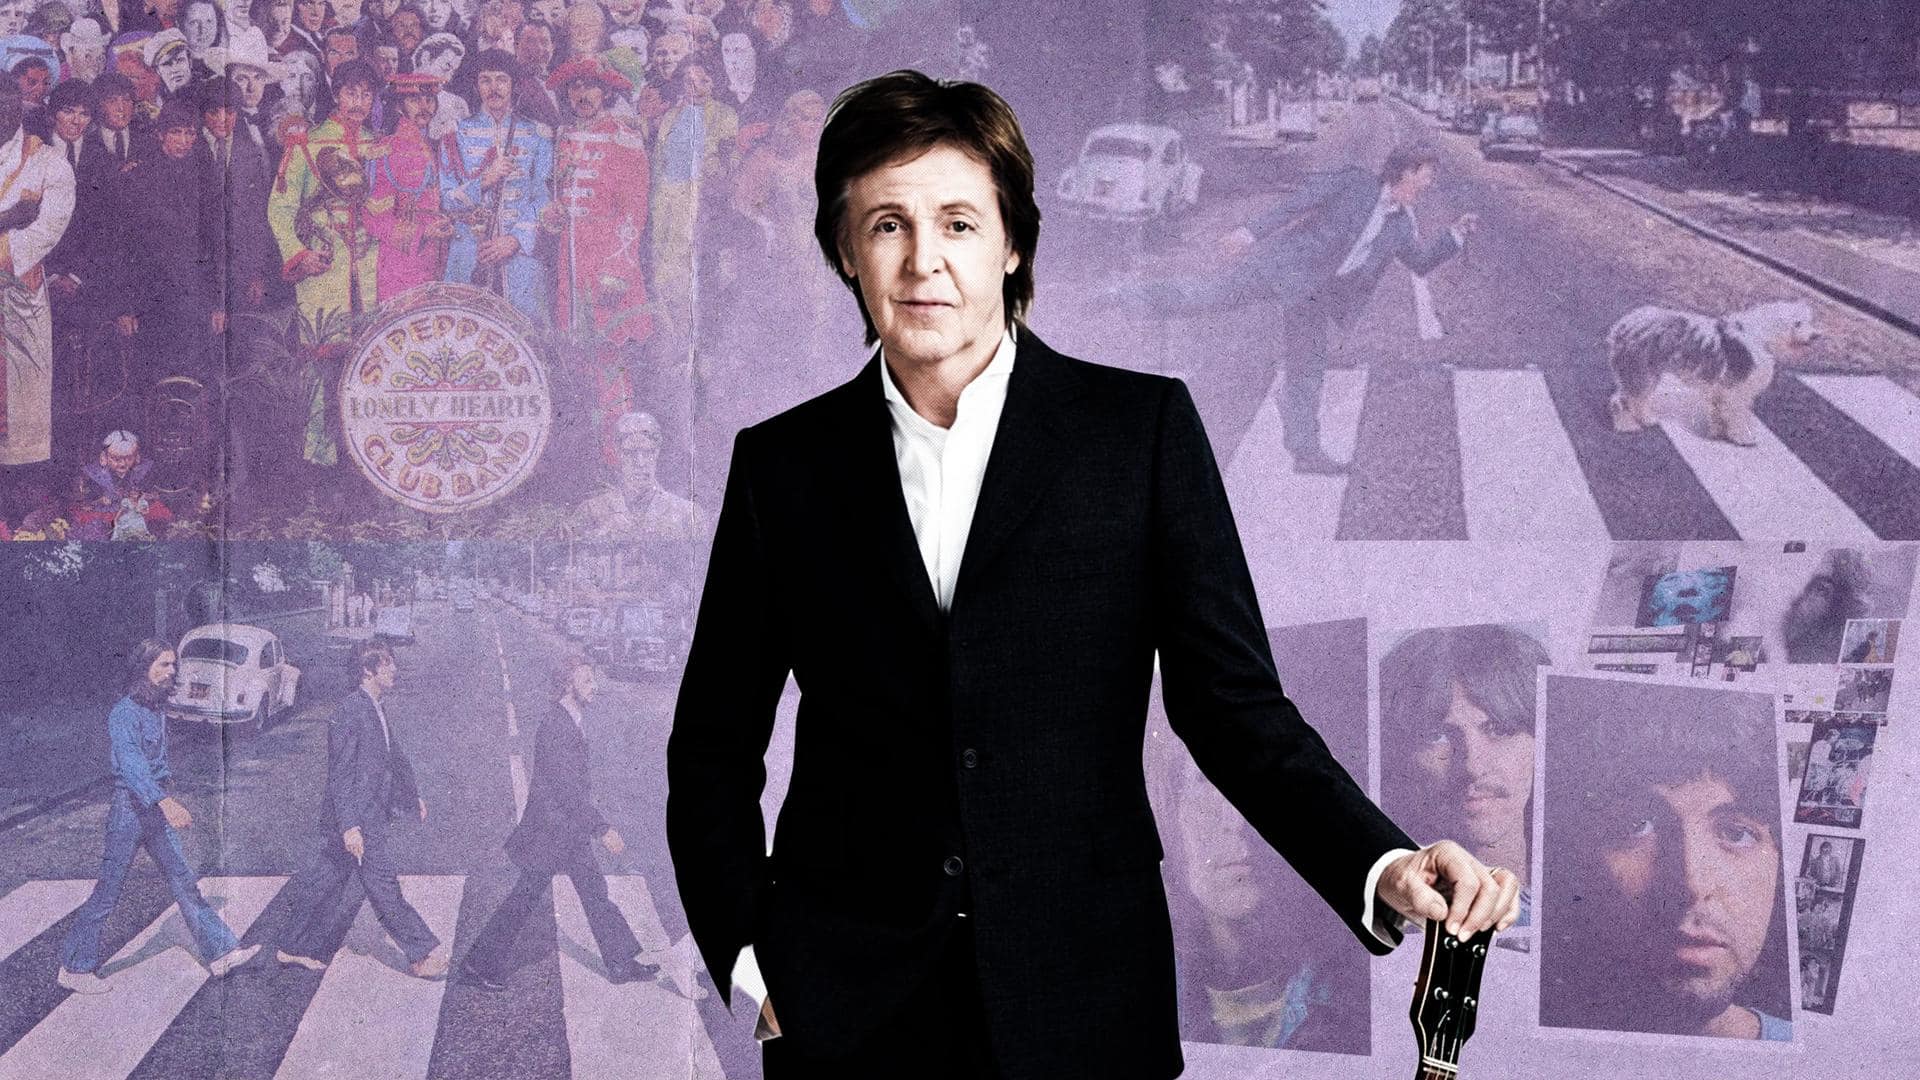 'Paul is dead': When McCartney's death conspiracy shaped society